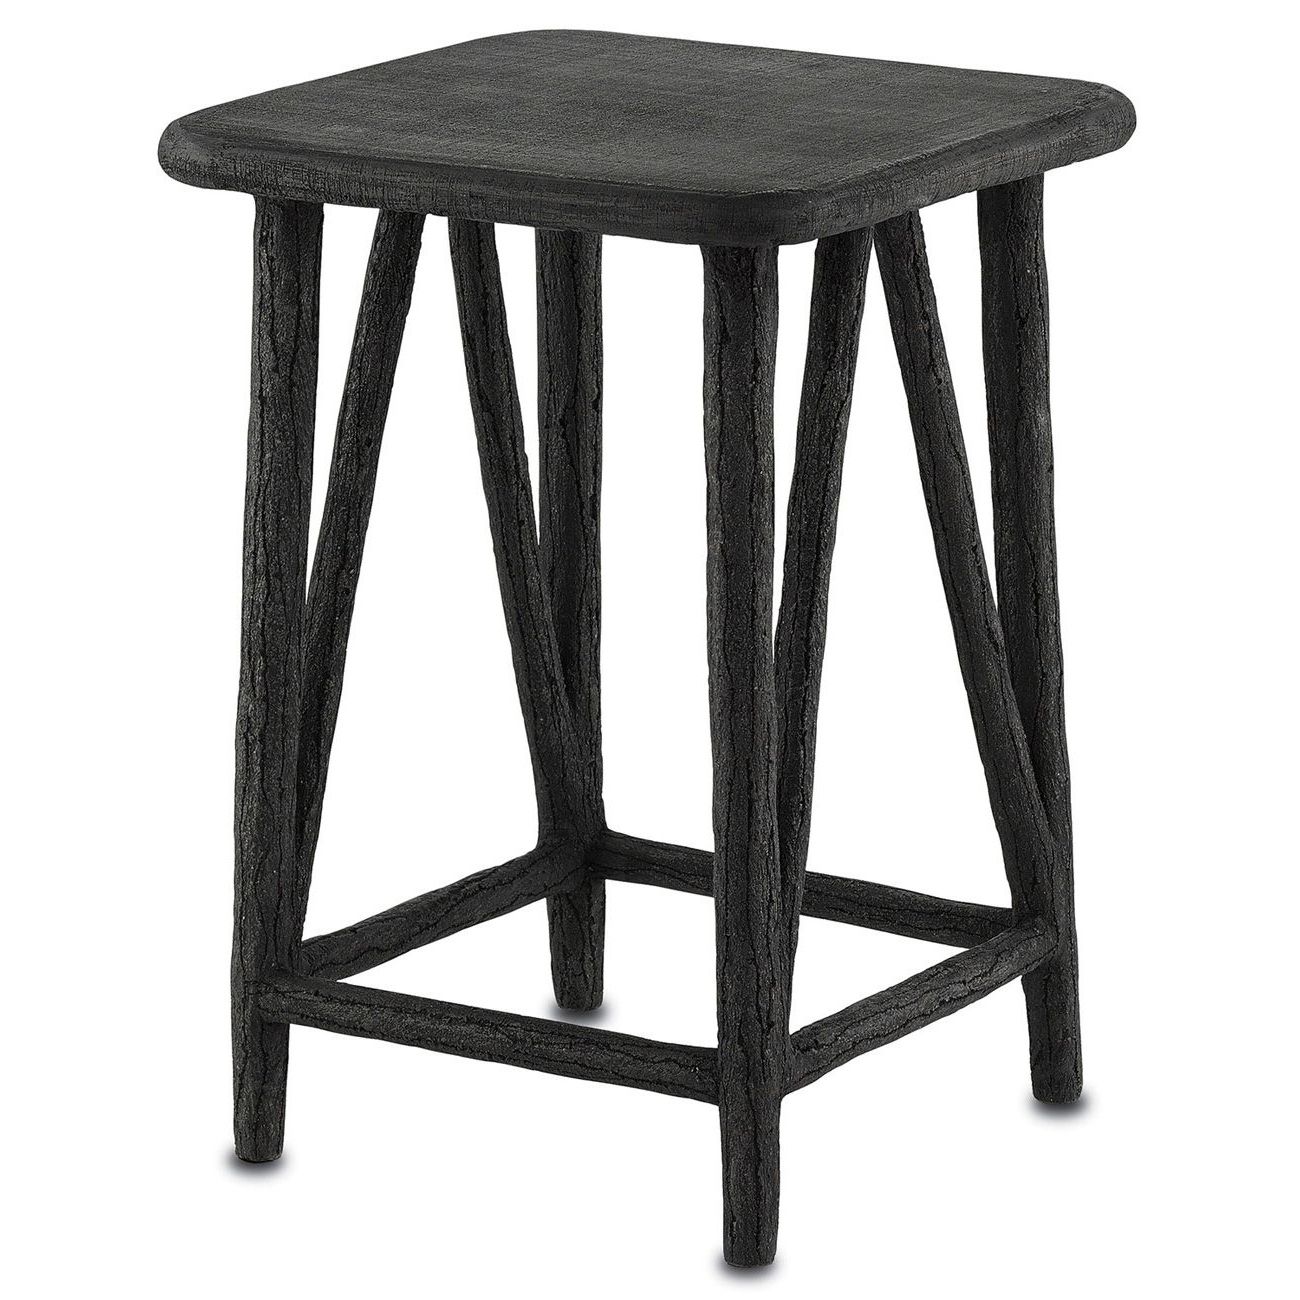 Black Iron Outdoor Accent Tables Throughout 2020 Kathy Kuo Home Naomi Modern Classic Distressed Black Concrete Outdoor (View 4 of 15)